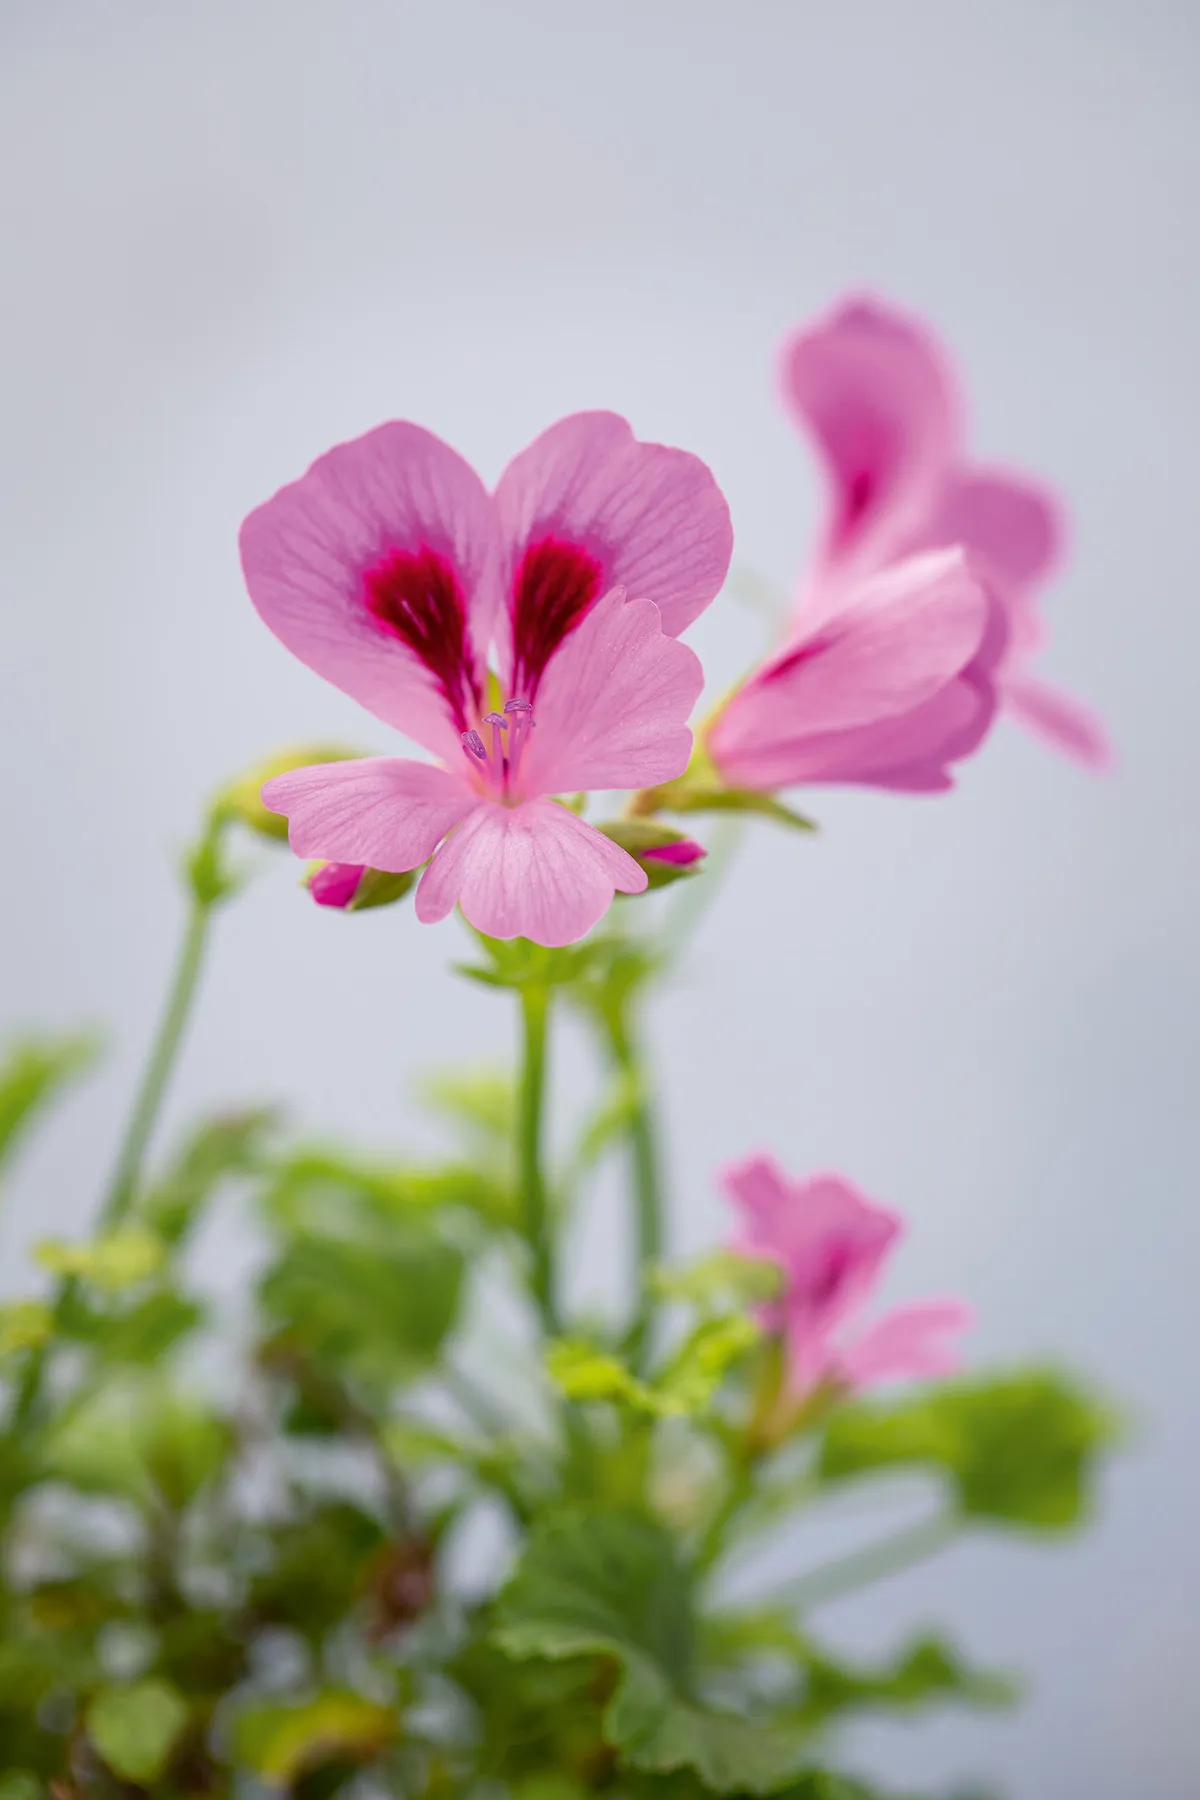 Pelargonium ‘April Showers’. A neat, well-shaped, floriferous plant that is one of the earliest to flower. The flowers are a soft lilac-pink, with a white throat and purple-red splashes on upper petals. Introduced in 2001 by breeder Derek Lloyd Dean. 45cm. RHS H1C, USDA 9b-13.